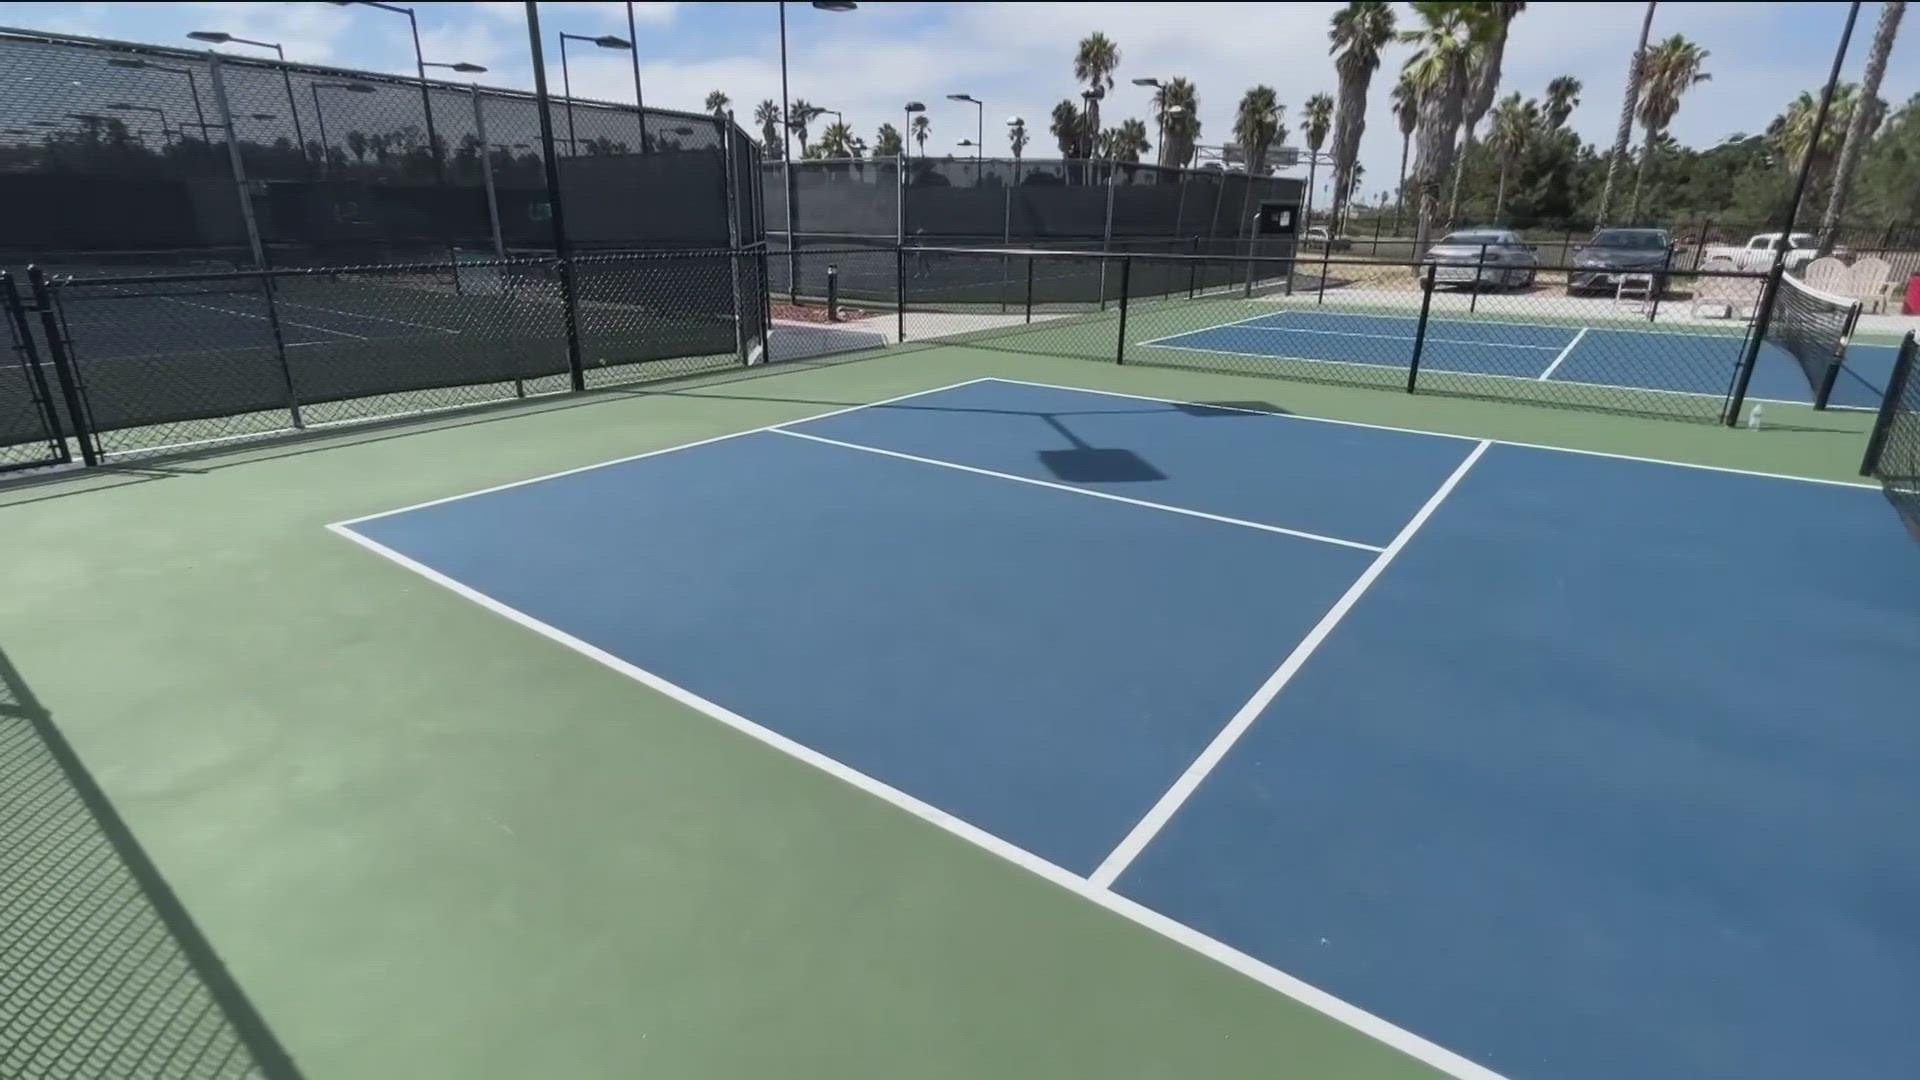 Pickleball players push for more courts at Ocean Beach park cbs8 com